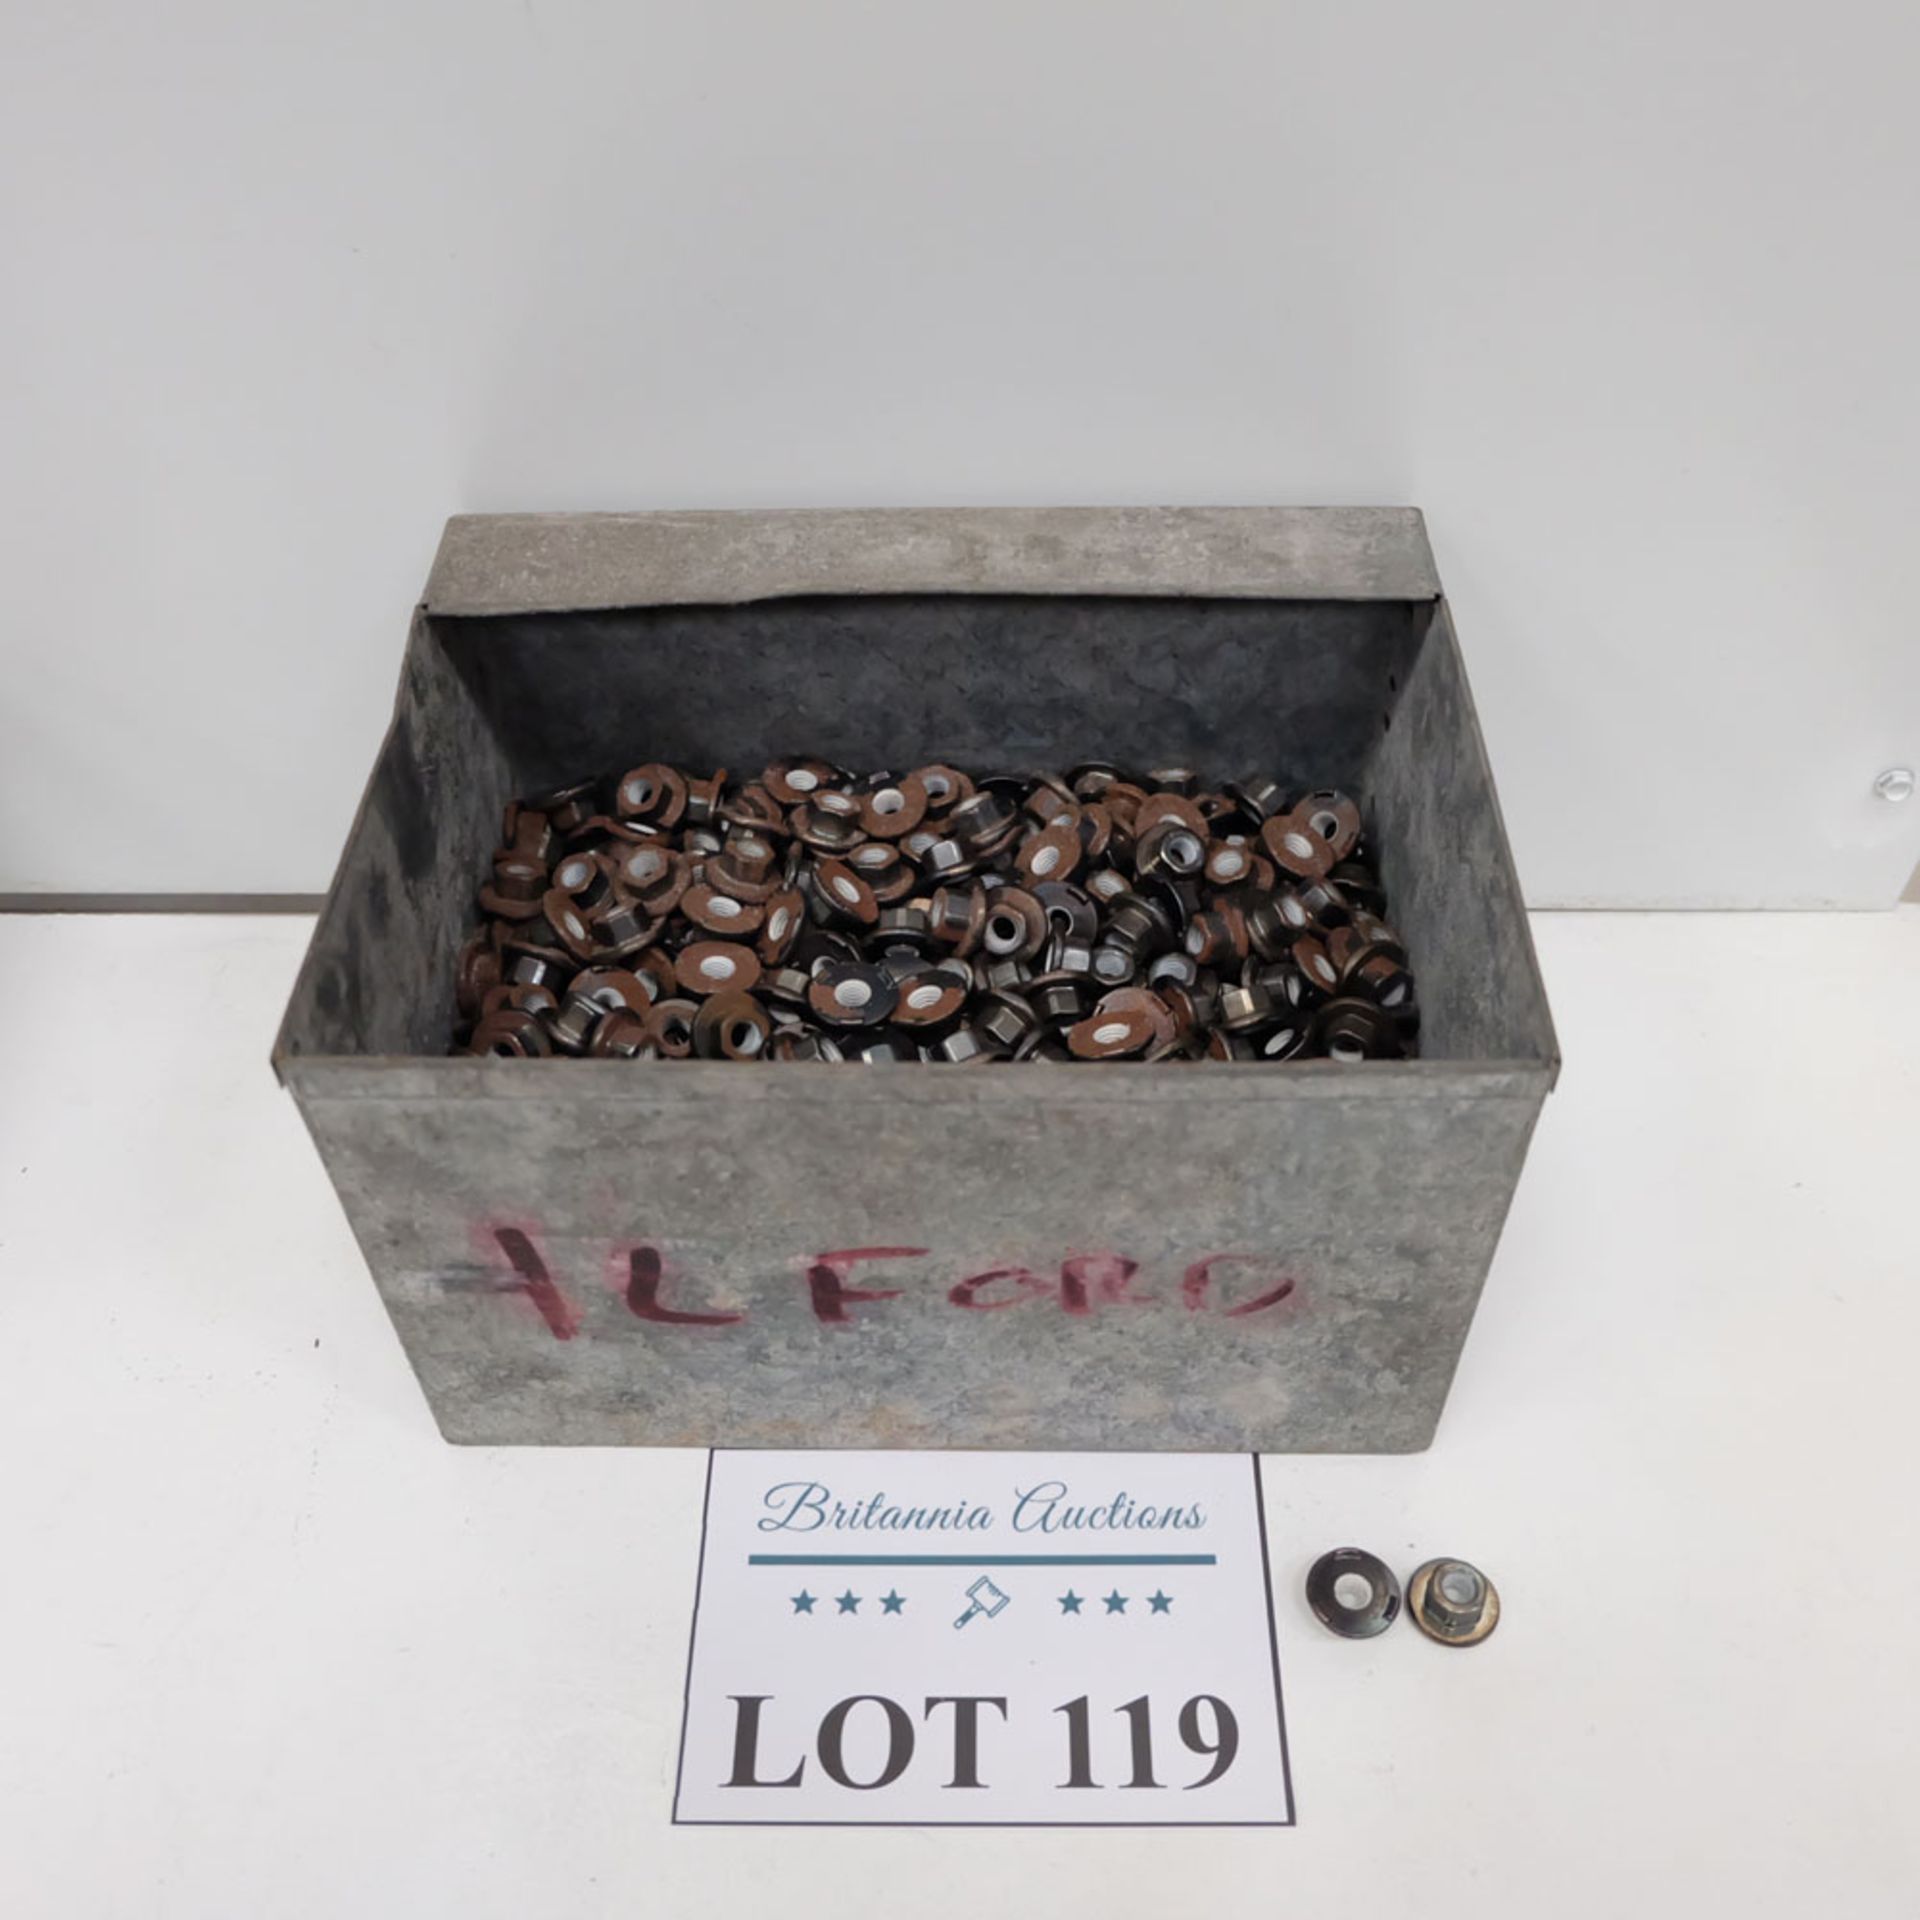 Quantity of Hex Nuts as Lotted. Labelled M8 Flanged Weld Nut.